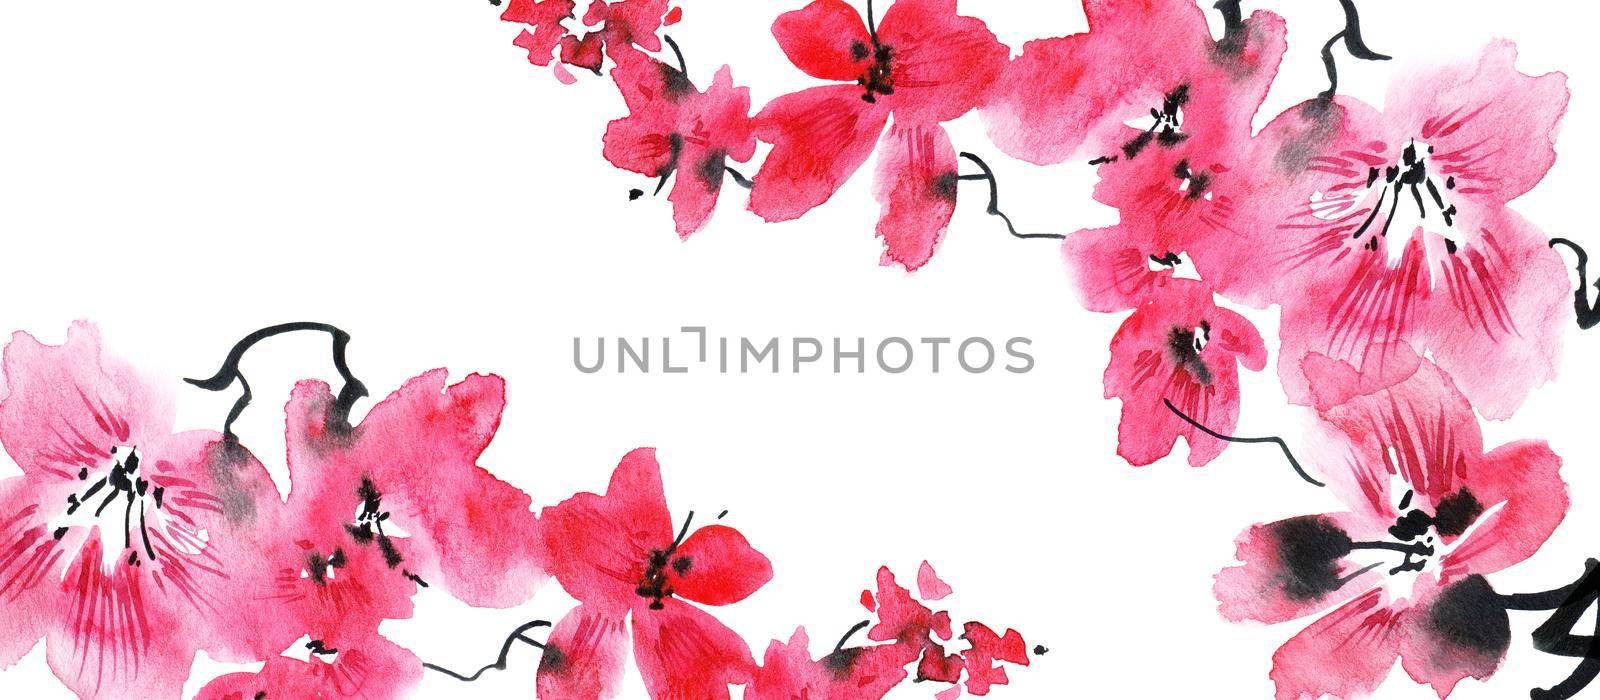 Watercolor illustration of blossom sakura tree with pink flowers and buds. Oriental traditional painting in style sumi-e, u-sin and gohua. Flowers on white background. Horizontal design.